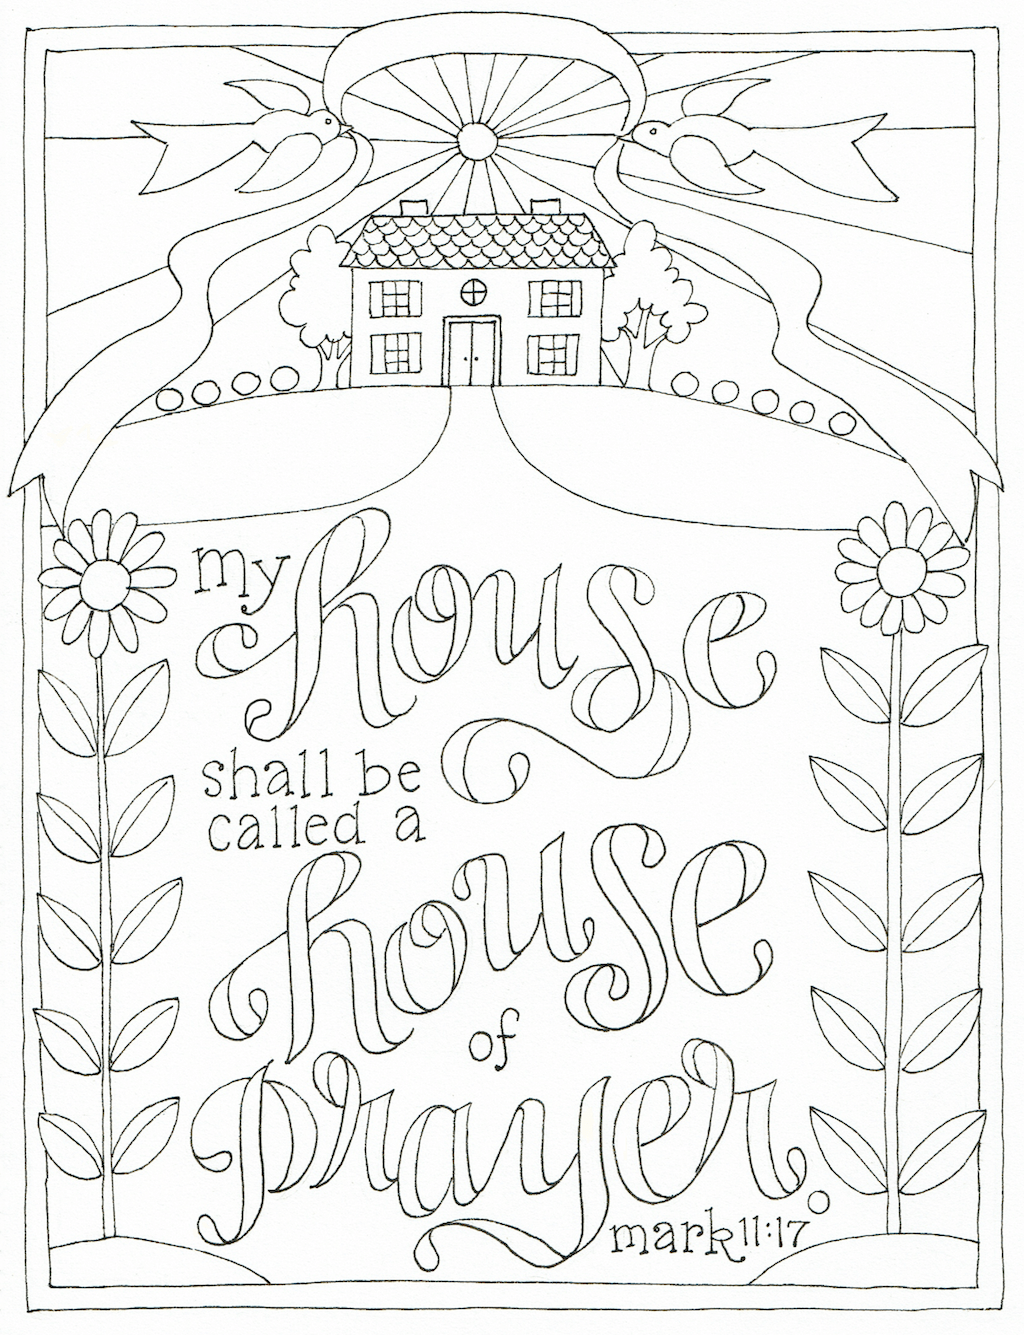 House of prayer coloring page